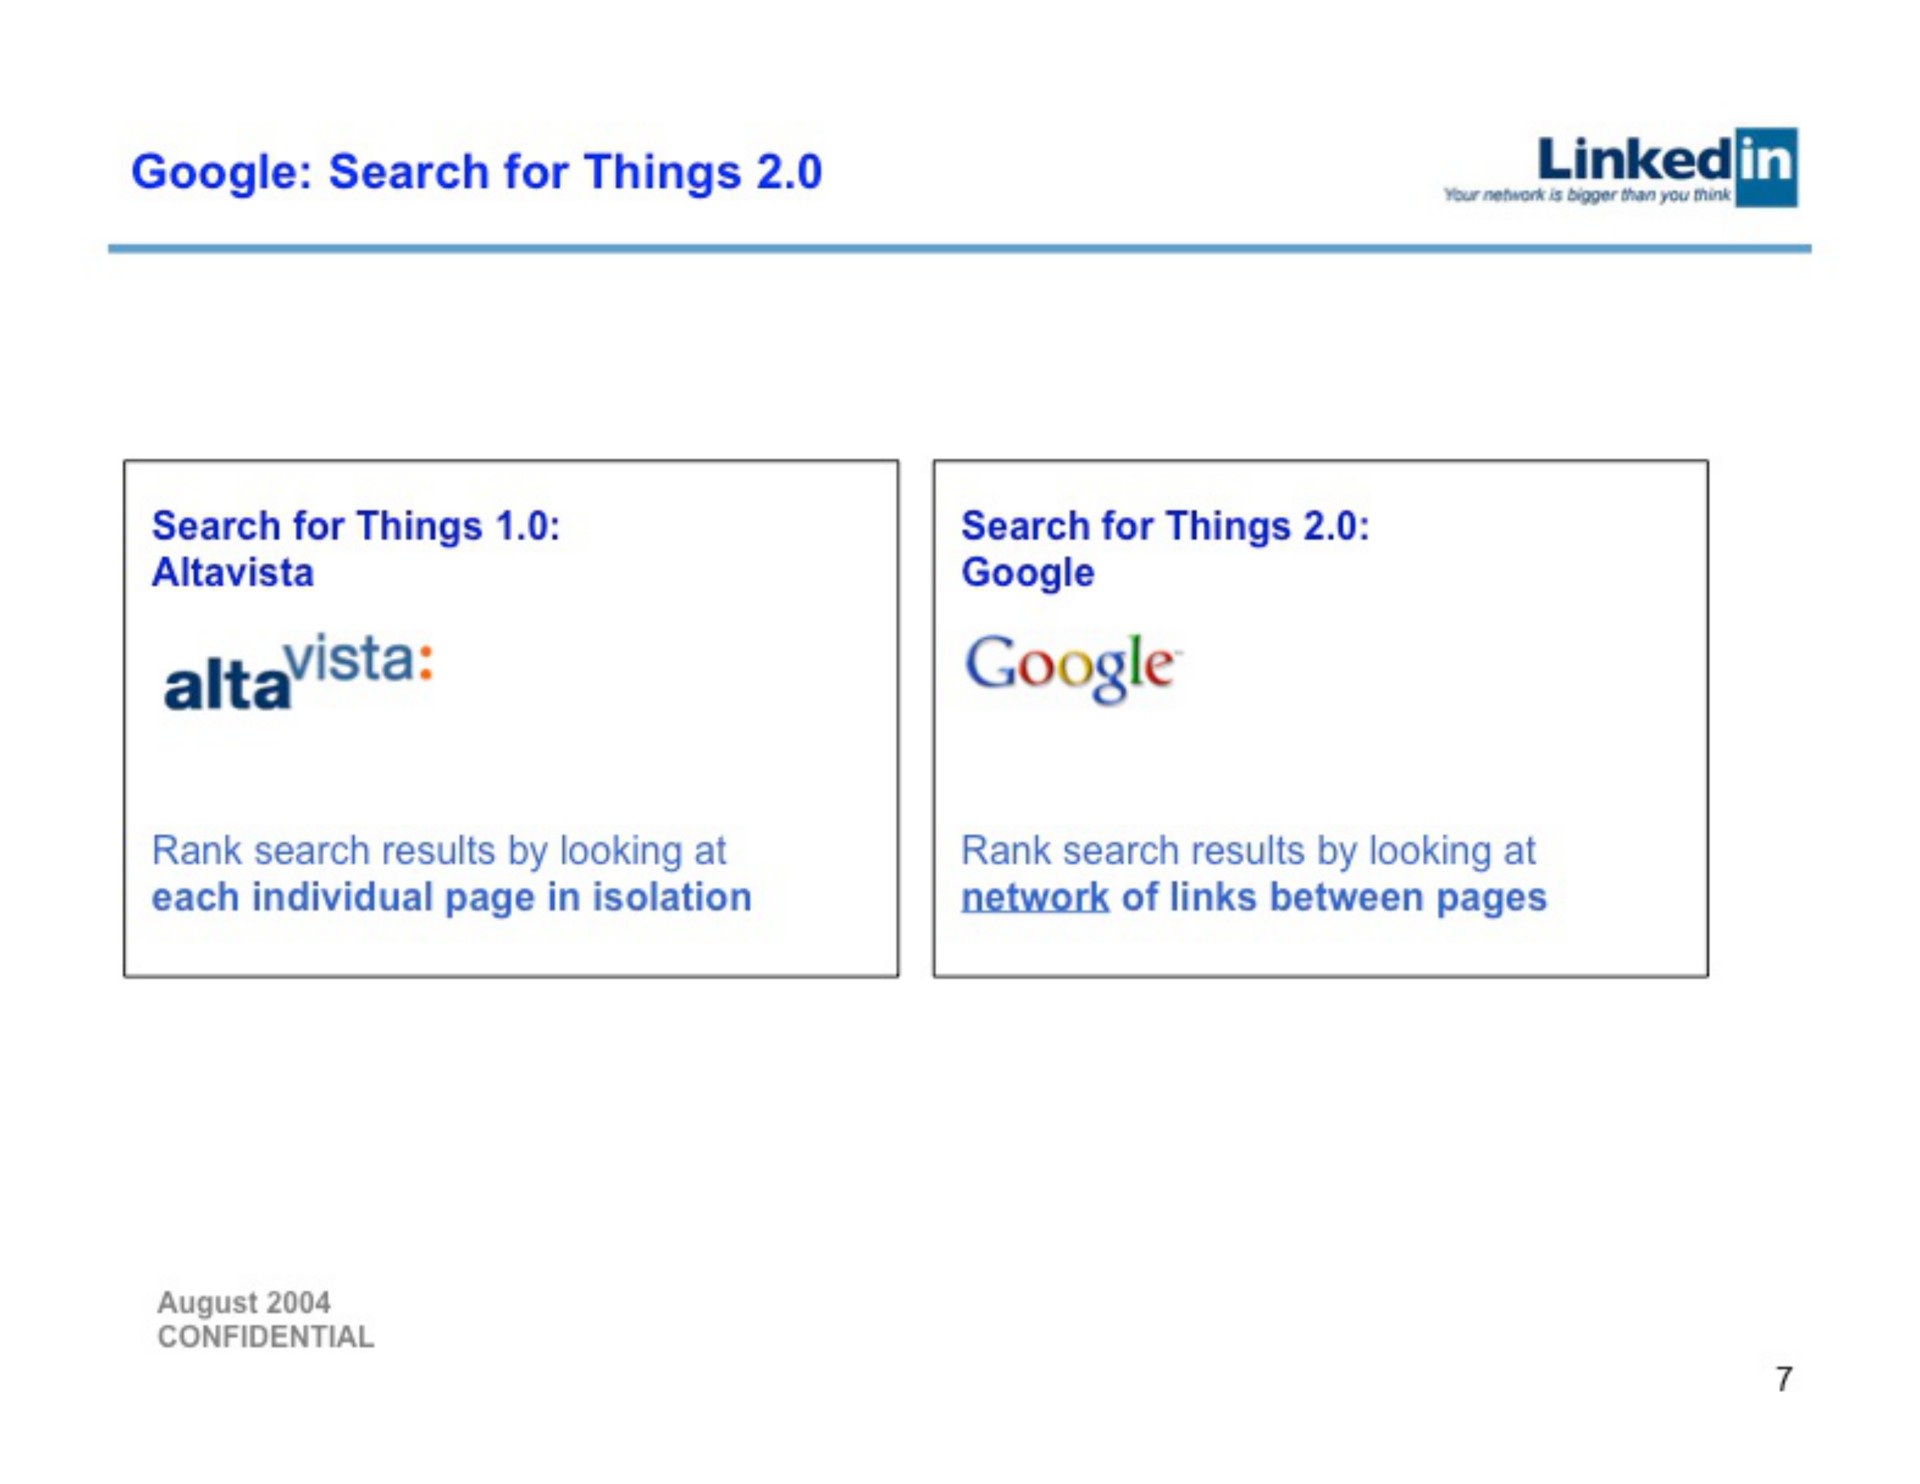 search for things linked search for things search for things each individual page in isolation network of links between pages | Linkedin